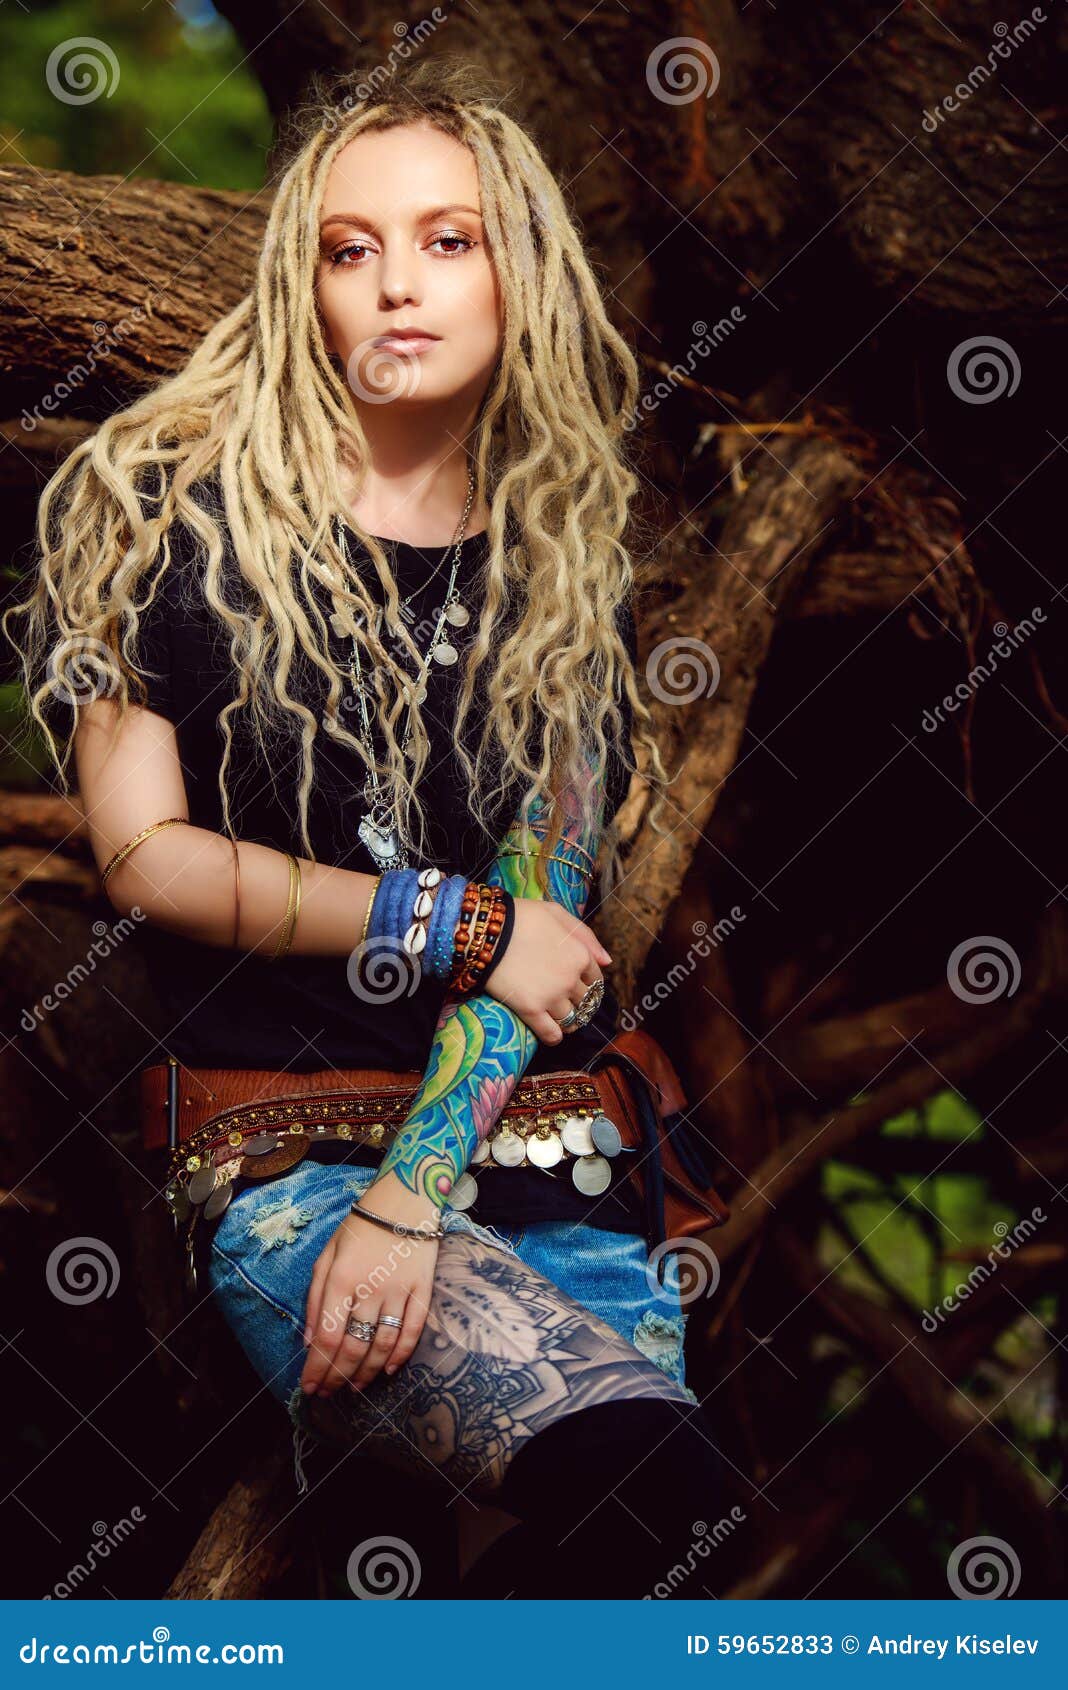 374 Cute Hippie Hairstyles Stock Photos HighRes Pictures and Images   Getty Images